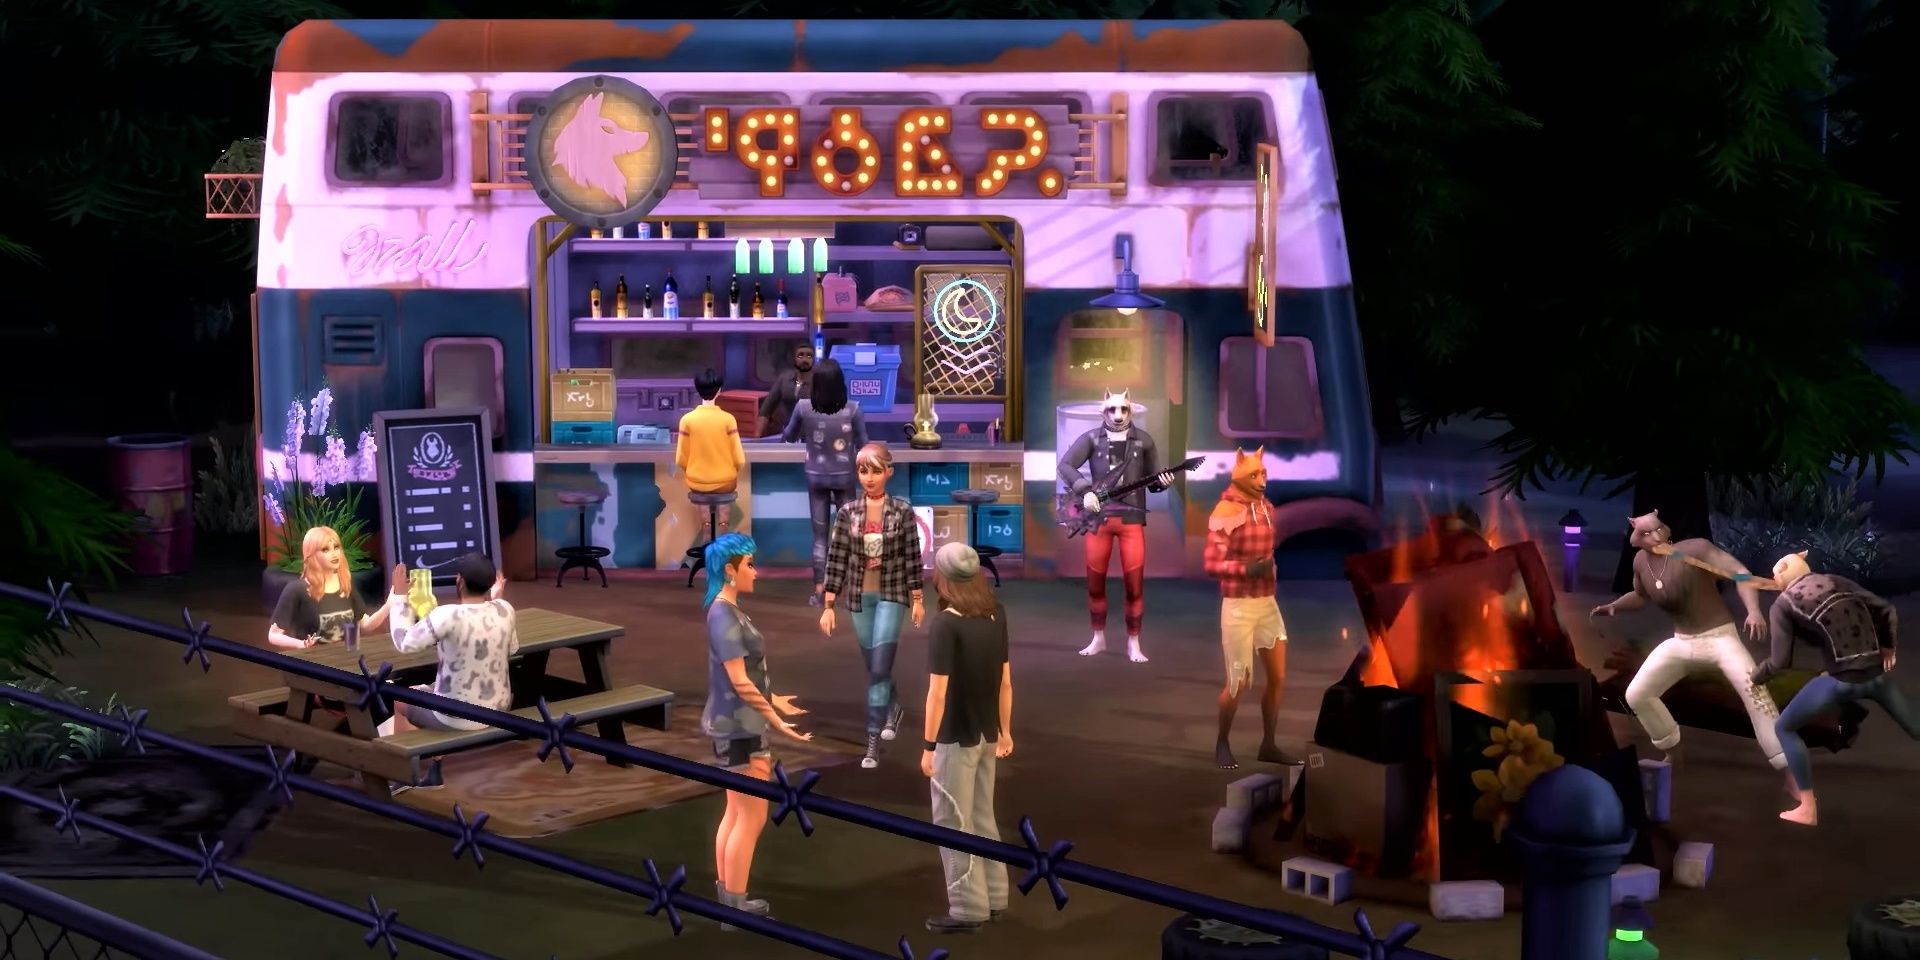 Moonwood Mill's bus bar is a popular hangout spot, full of werewolves in wolf and Sim form.